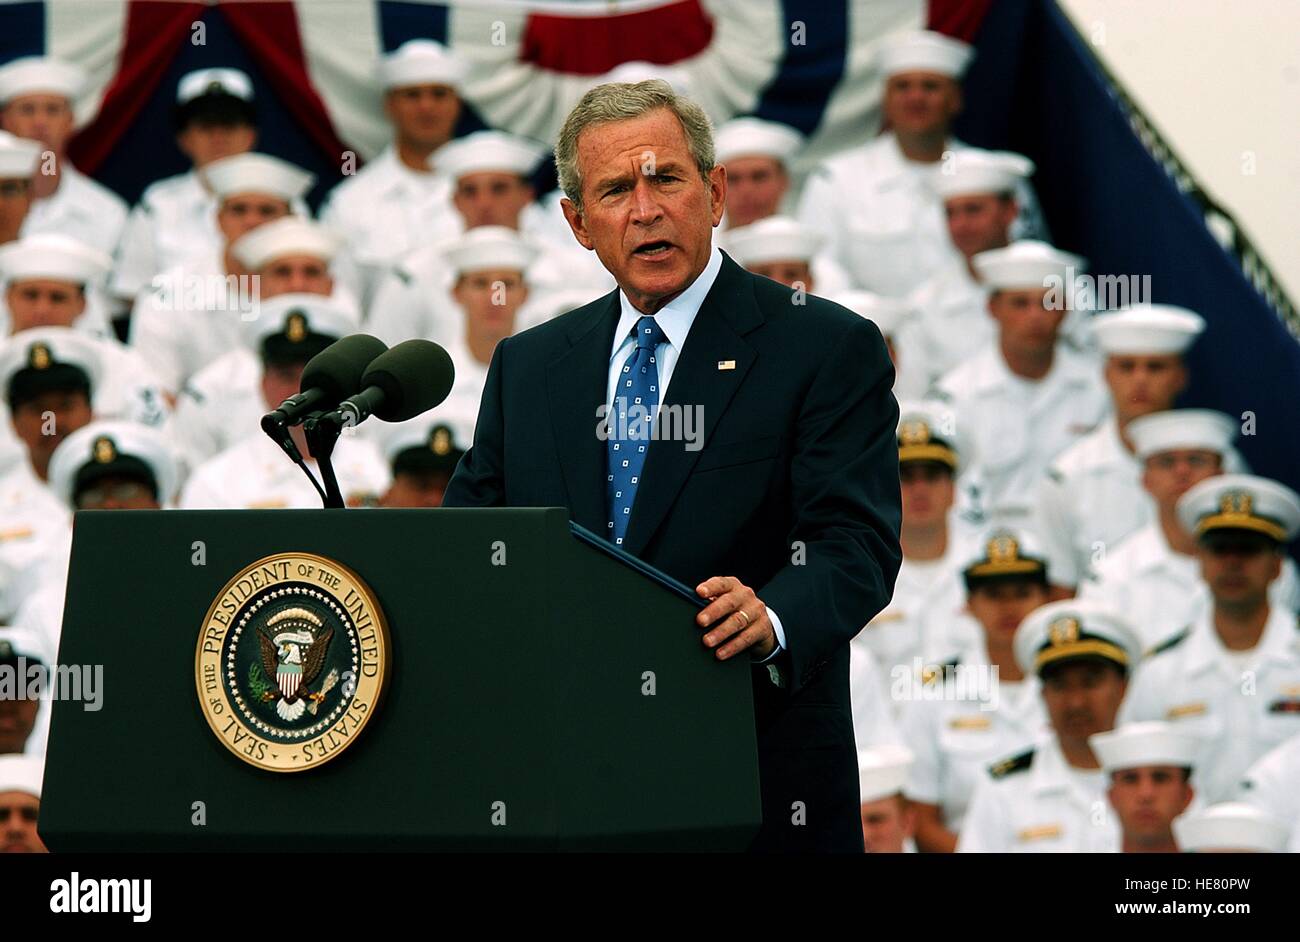 U.S. President George W. Bush talks to a crowd of U.S. soldiers during an event commemorating the 60th anniversary of Victory over Japan Day at the Naval Air Station North Island August 30, 2005 in Coronado, California. Stock Photo